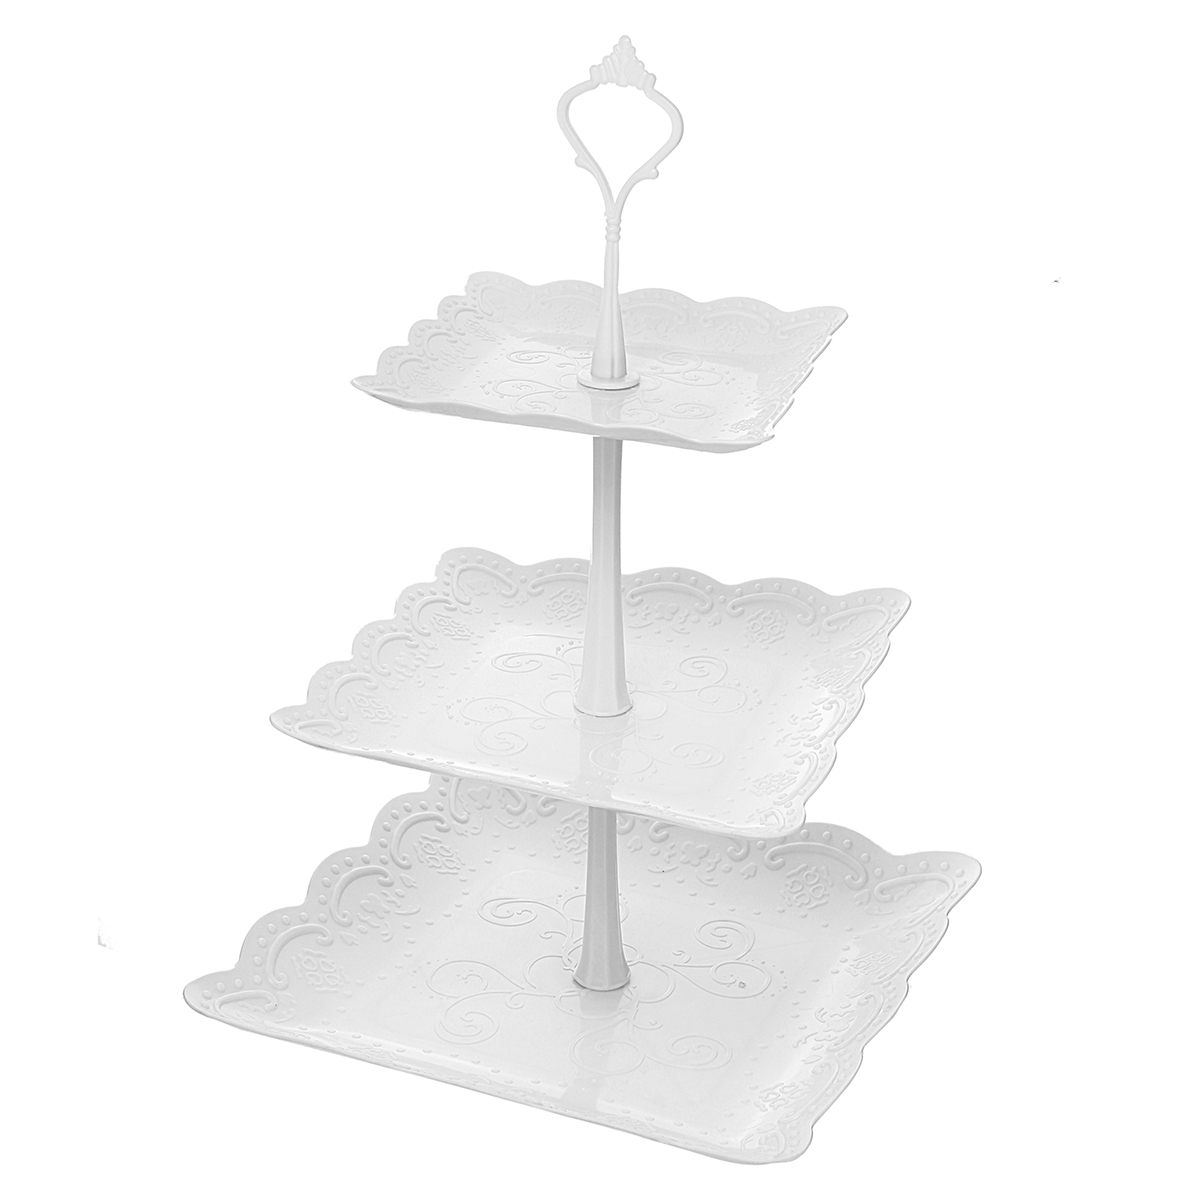 

3 Tier Cake Stand Afternoon Tea Wedding Plates Party Embossed Display Tableware Cake Decorations